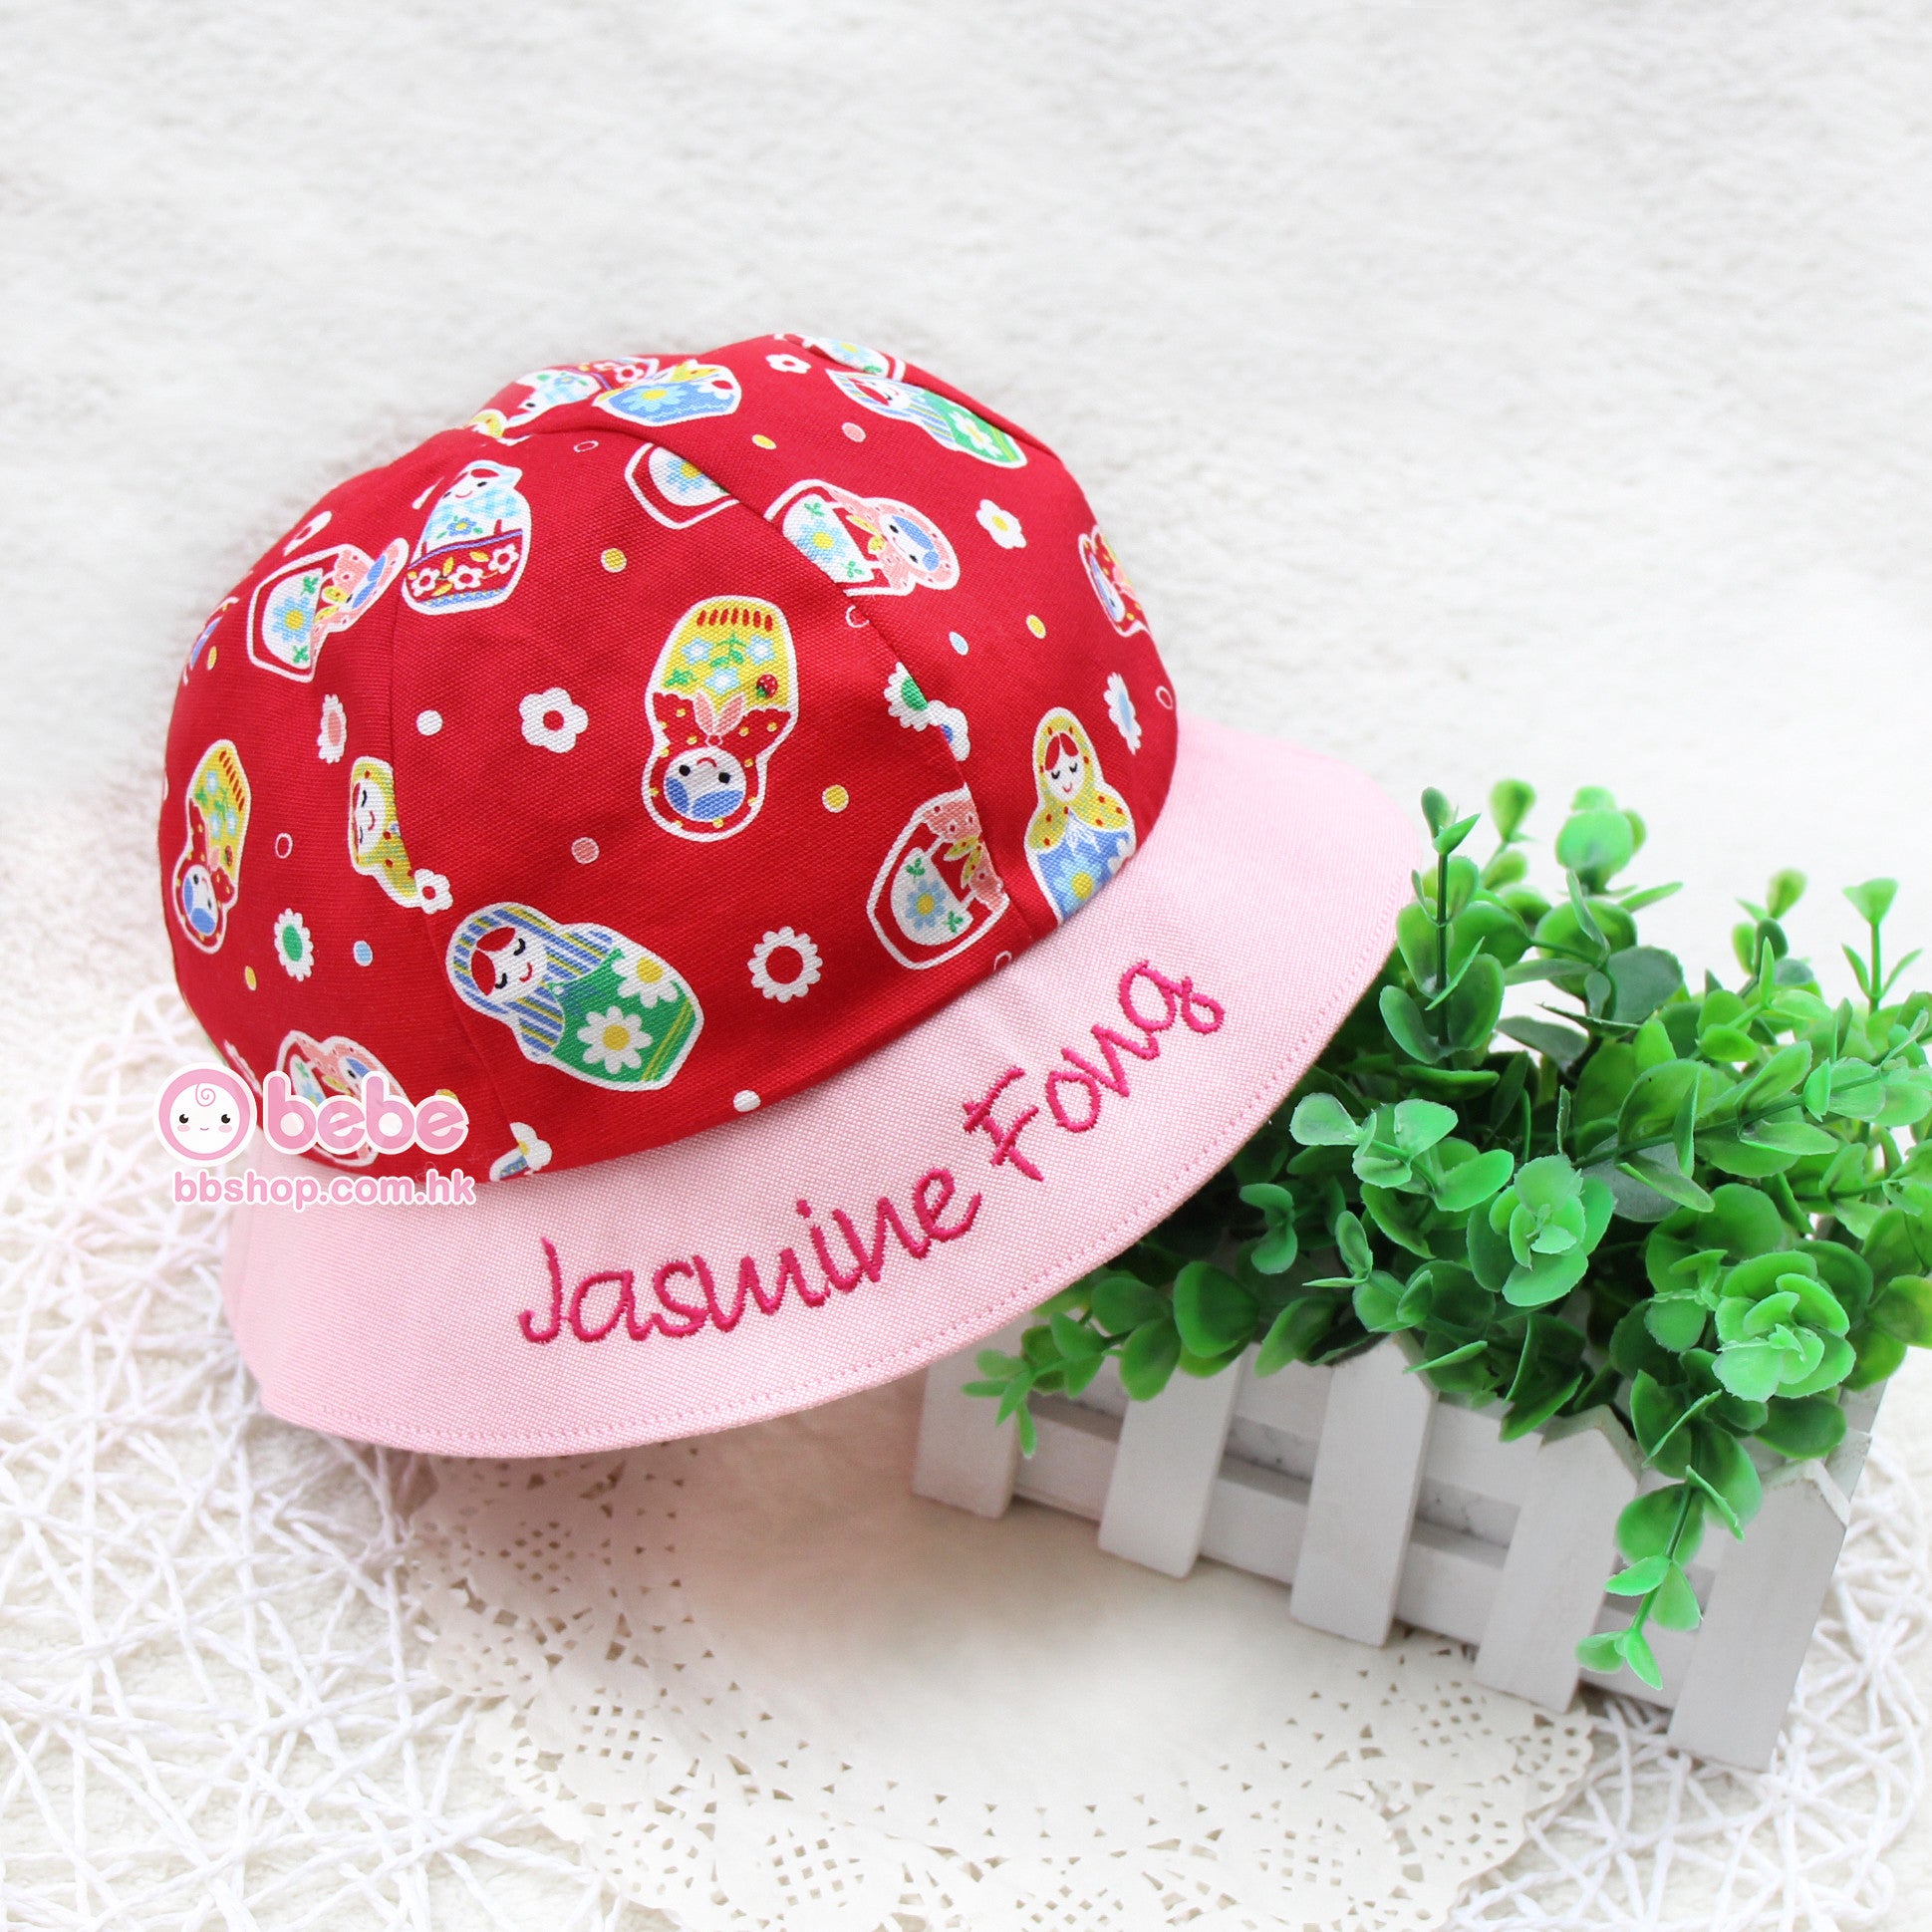 HMH215 紅色俄羅斯娃娃繡名帽仔 Red Russian Doll Personalized Hat